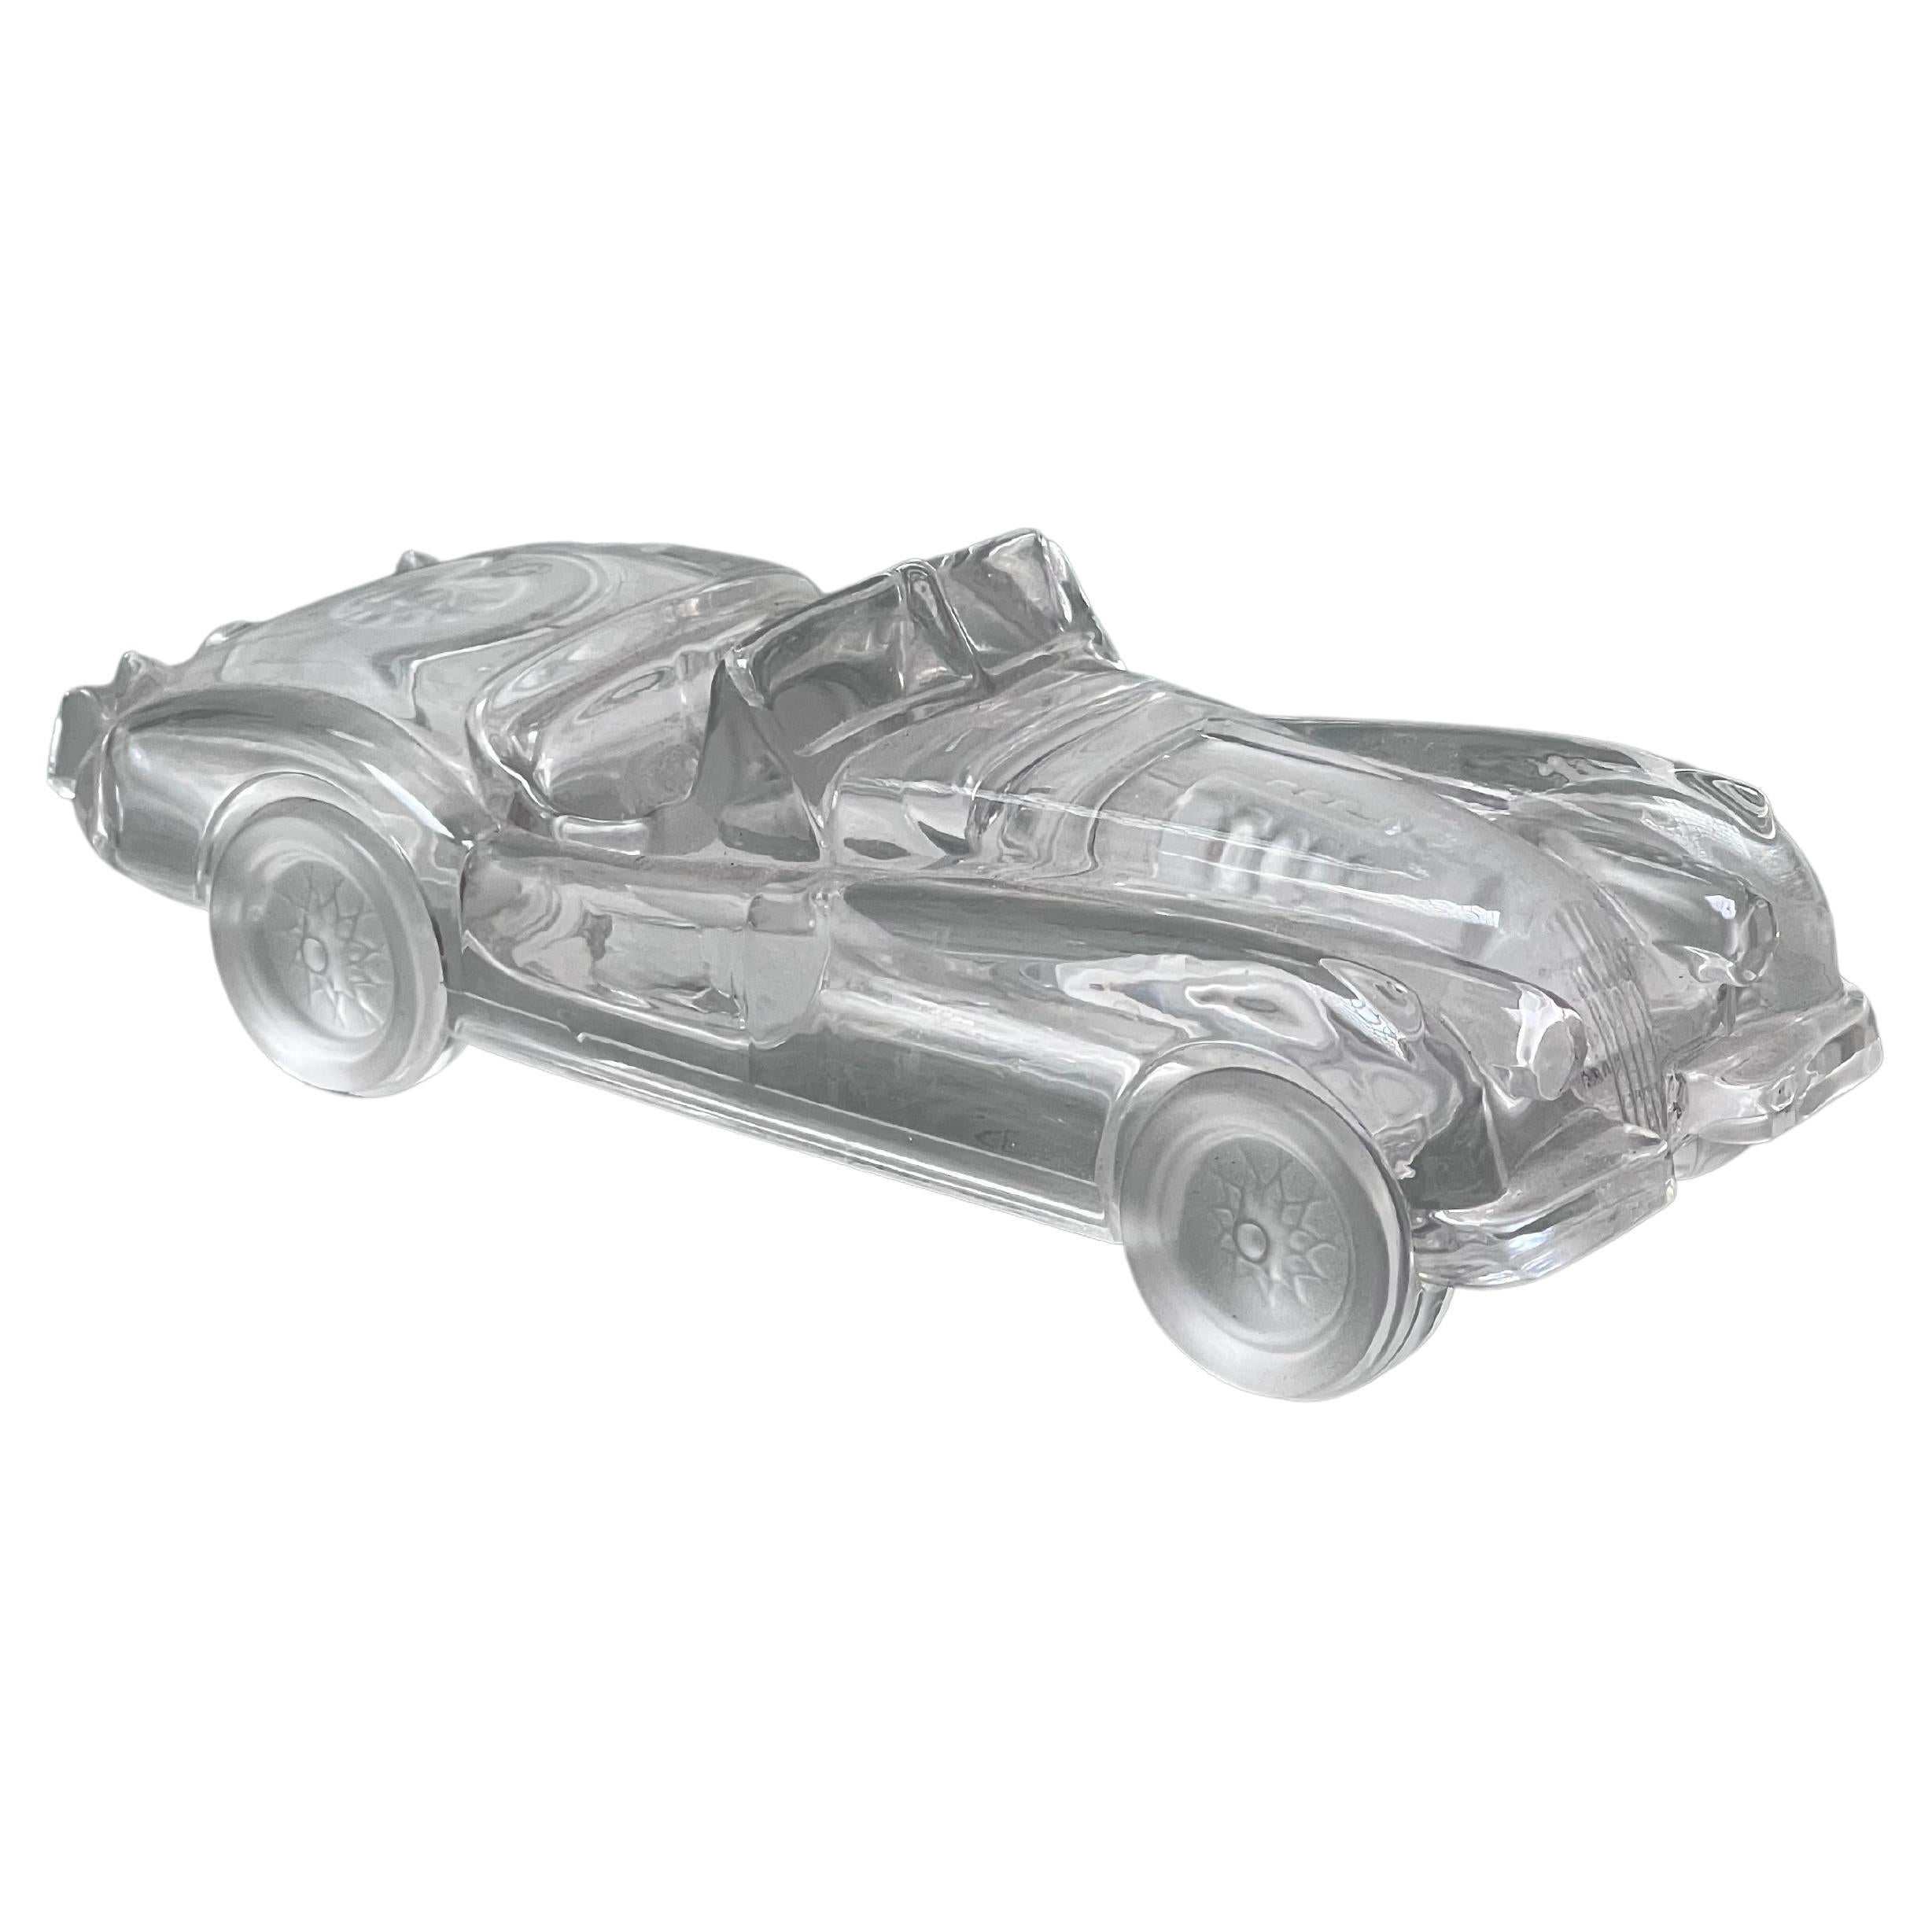 Jaguar XK 120 model car in clear crystal, decorative object, made in Italy For Sale